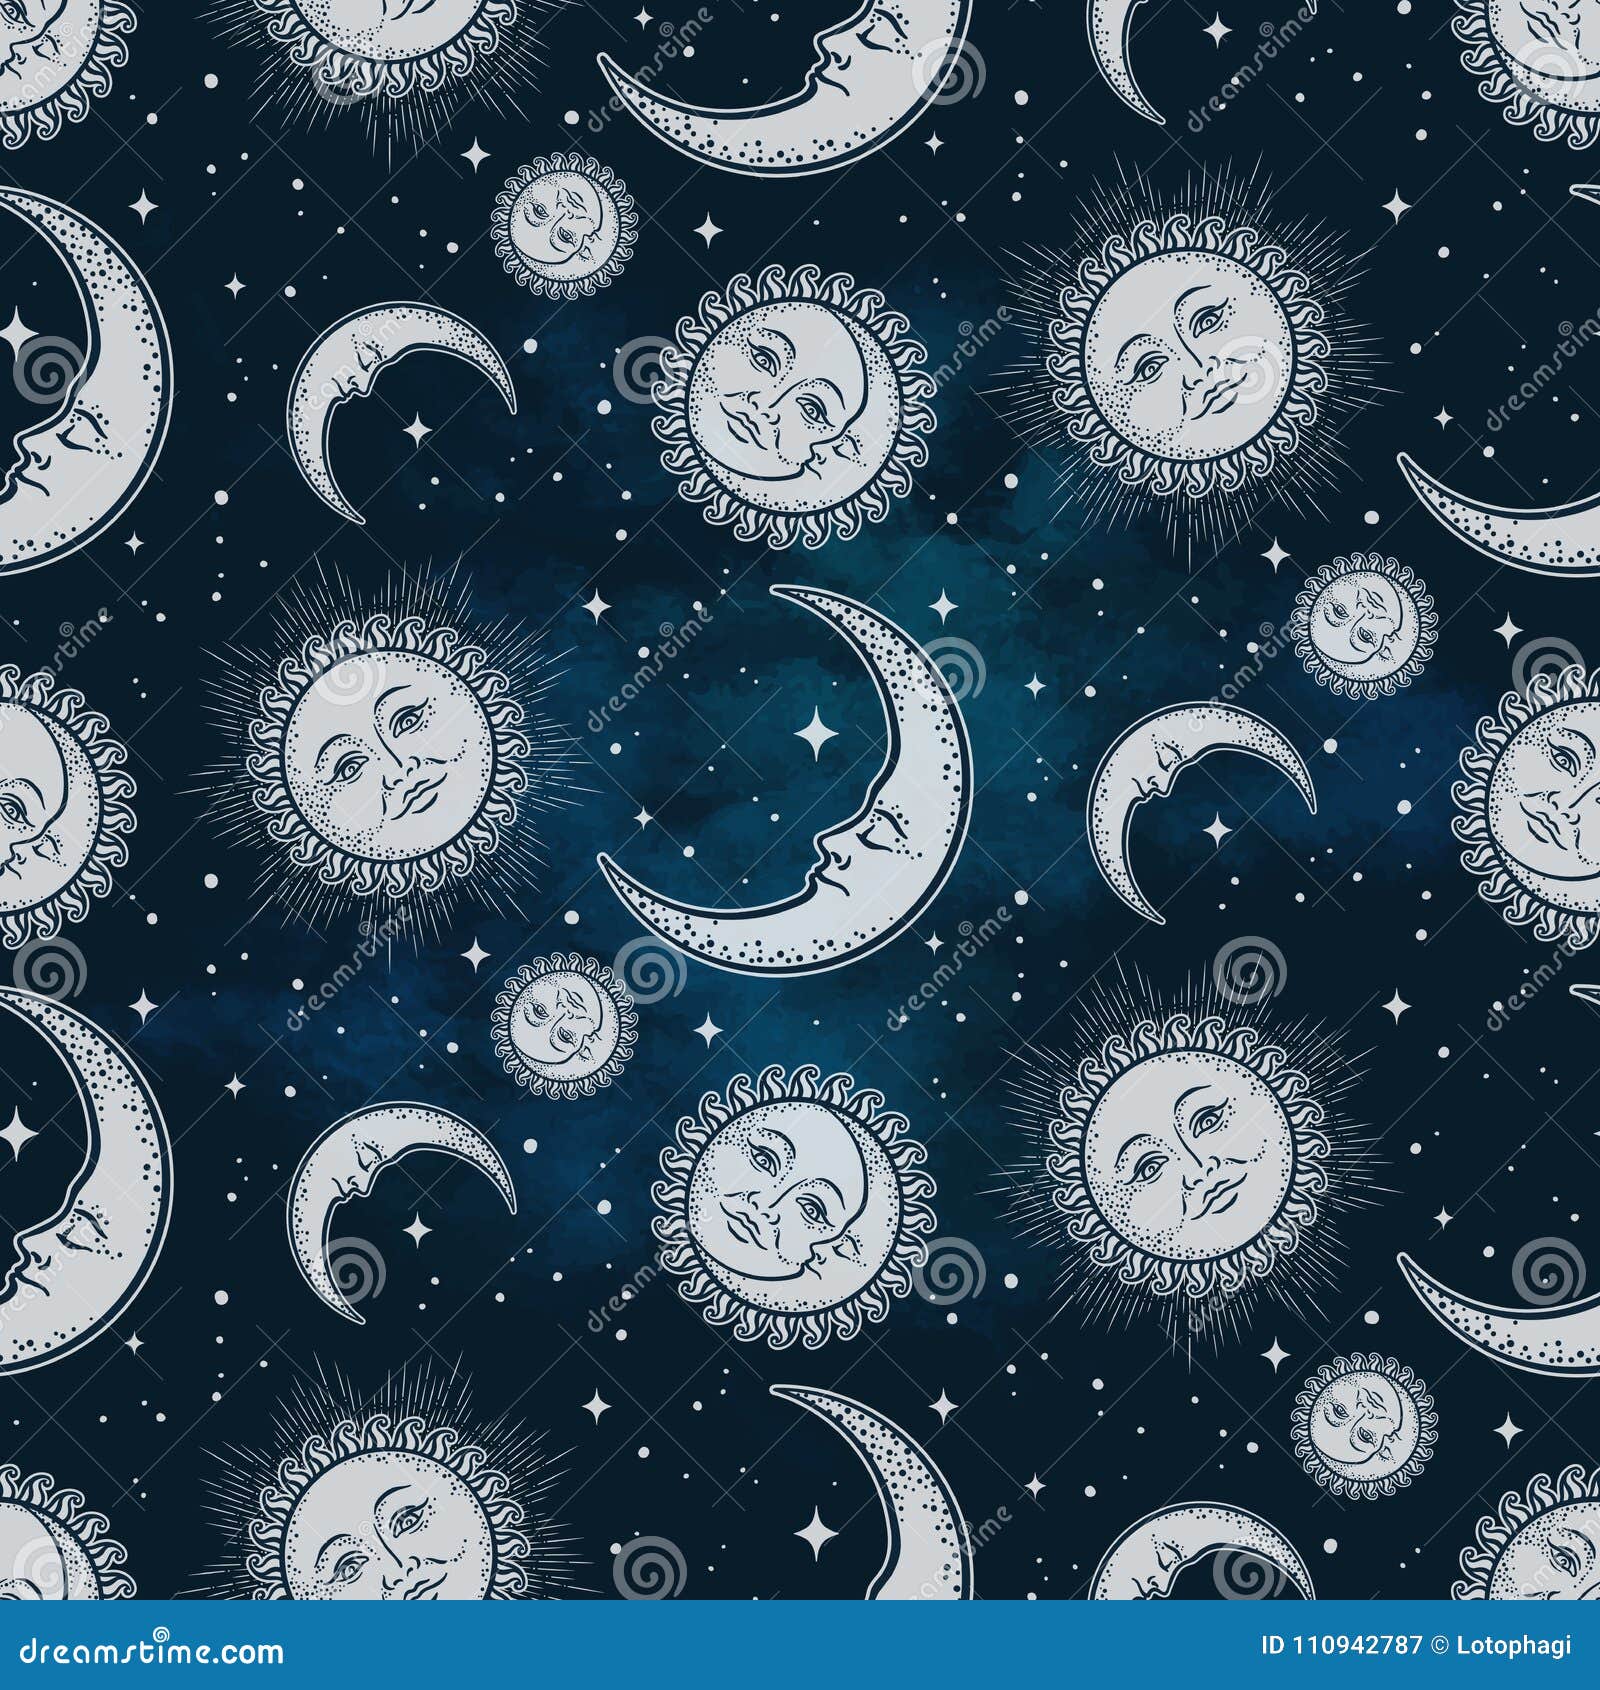 seamless pattern with celestial bodies - moon, sun and stars over blue night sky background. boho chic fabric print, wrapping pape